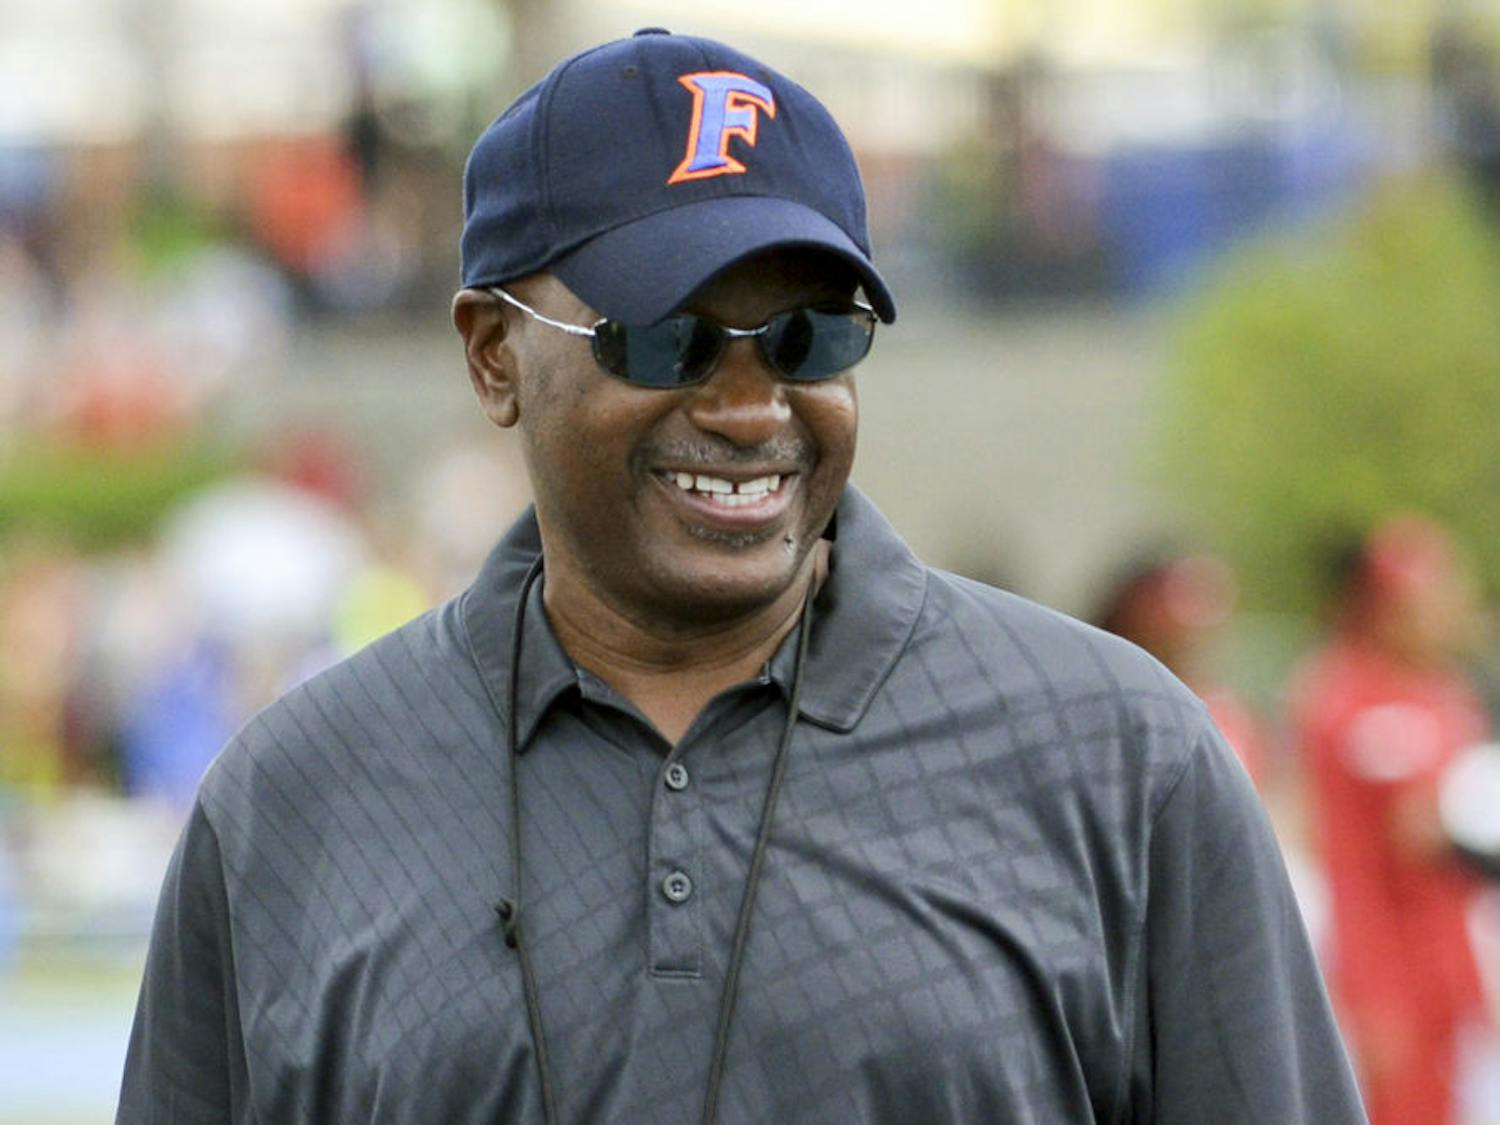 UF coach Mike Holloway smiles during the 2015 Florida Relays at James G. Pressly Stadium.